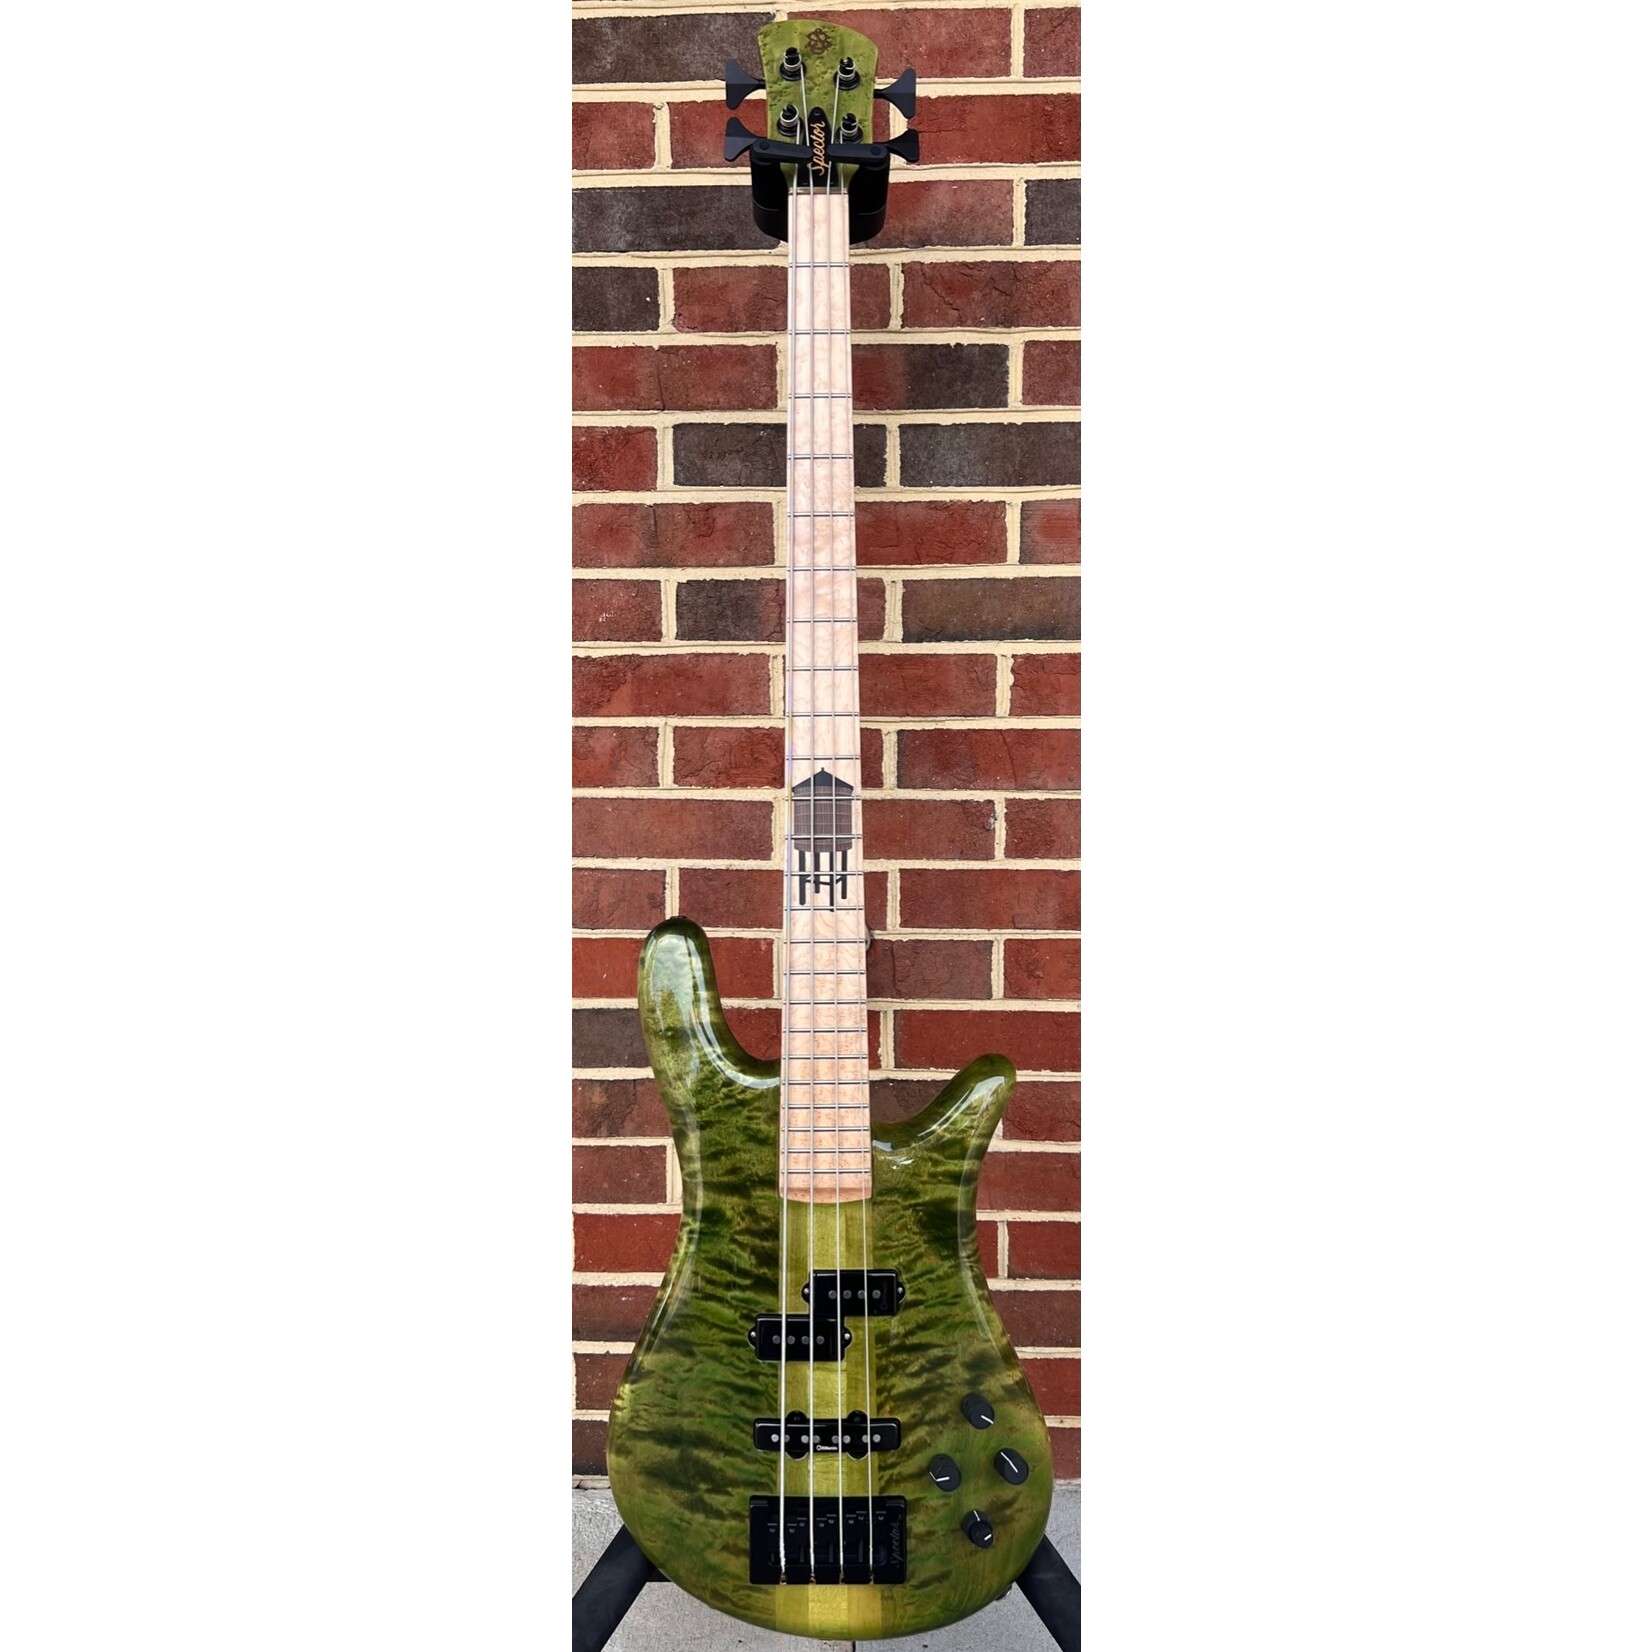 Spector Spector USA NS-2XL Kris, Woodstock Custom Collection V2, 35" Scale Length, Catskill Autumn Foliage, Quilted Maple Top, Reclaimed Redwood Body, Birdseye Maple Fretboard, Redwood Water Tower Inlay, HAZ 18v Preamp, Brass Bridge, Hardshell Case